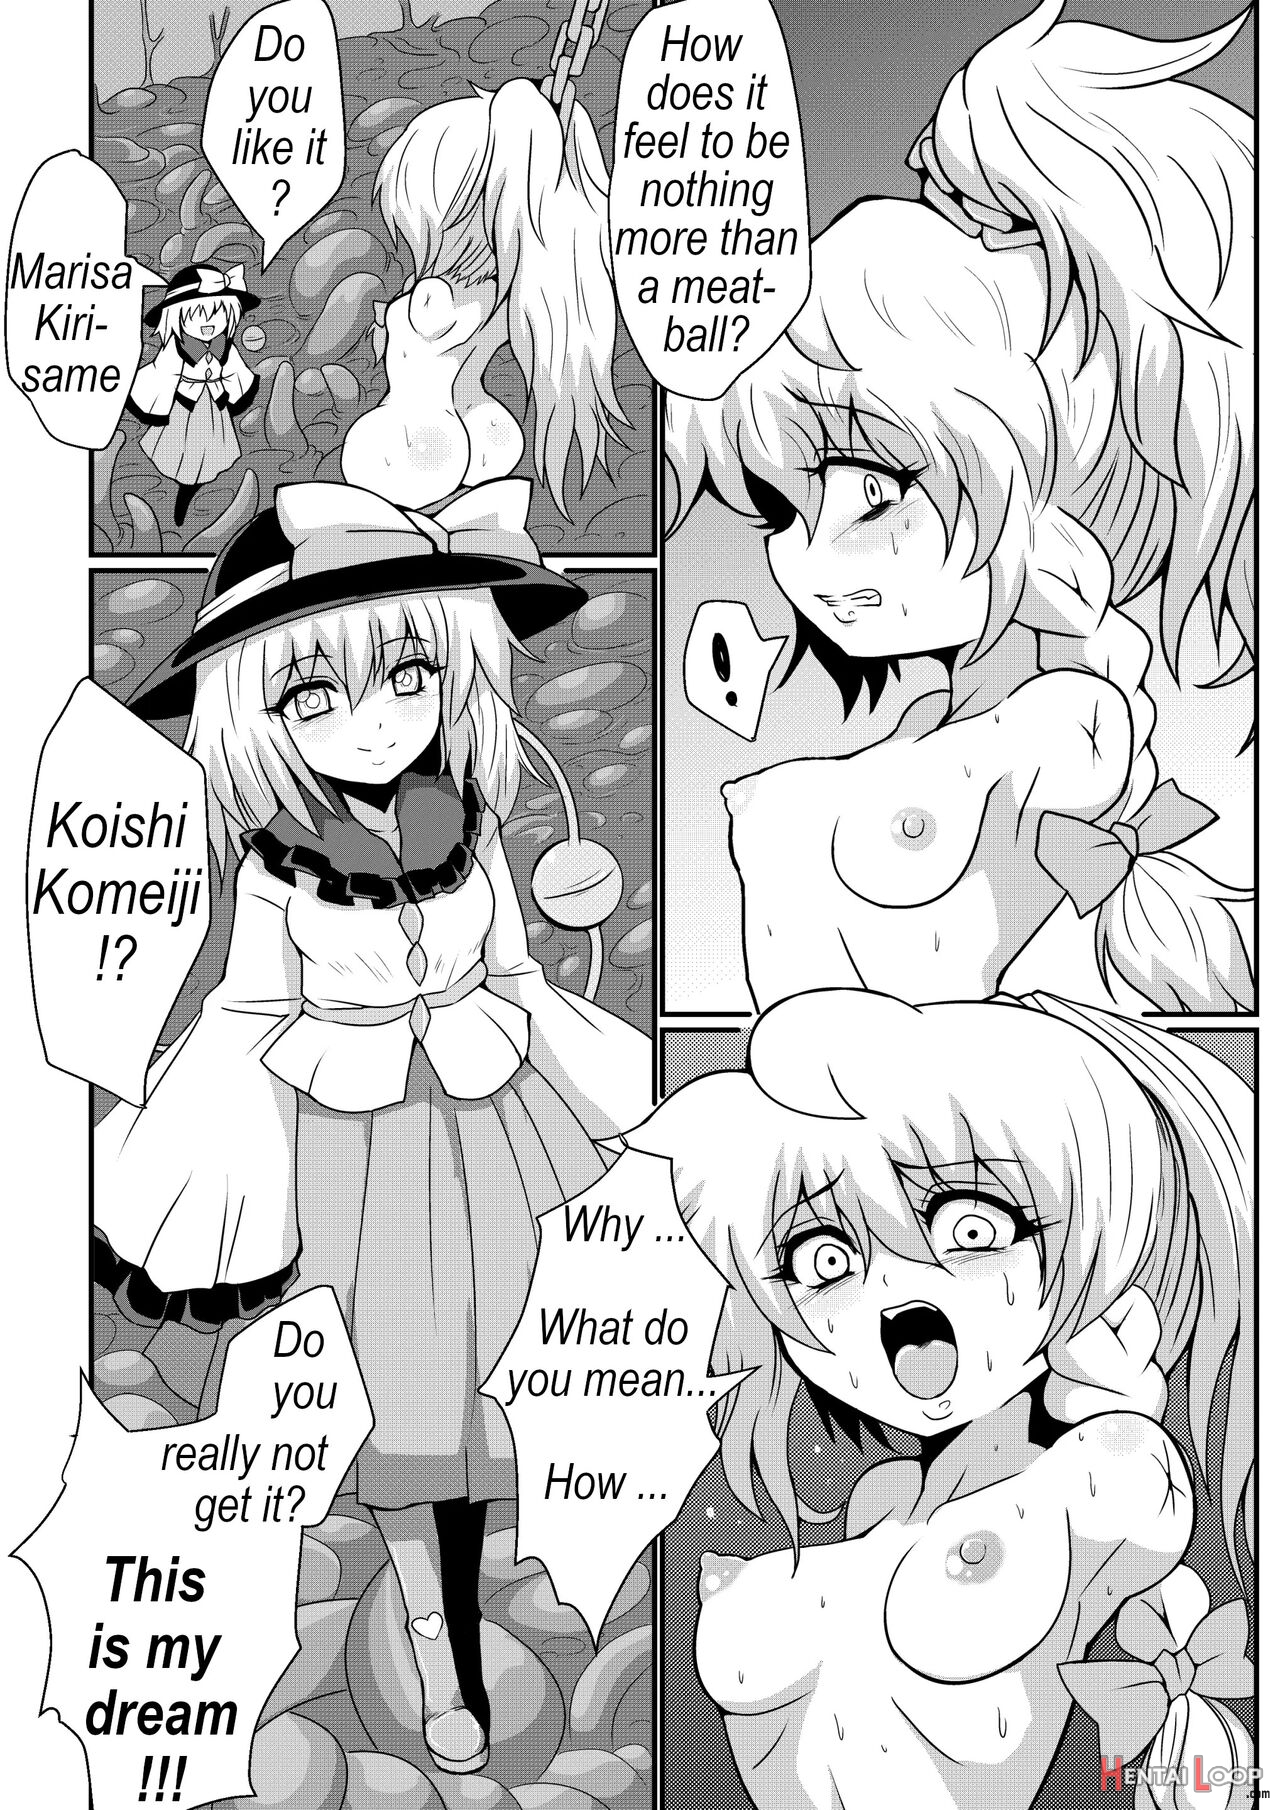 Marisa's Thrill - Take Care Of Yourself - 通り魔理沙にきをつけろ - Part 8 page 10